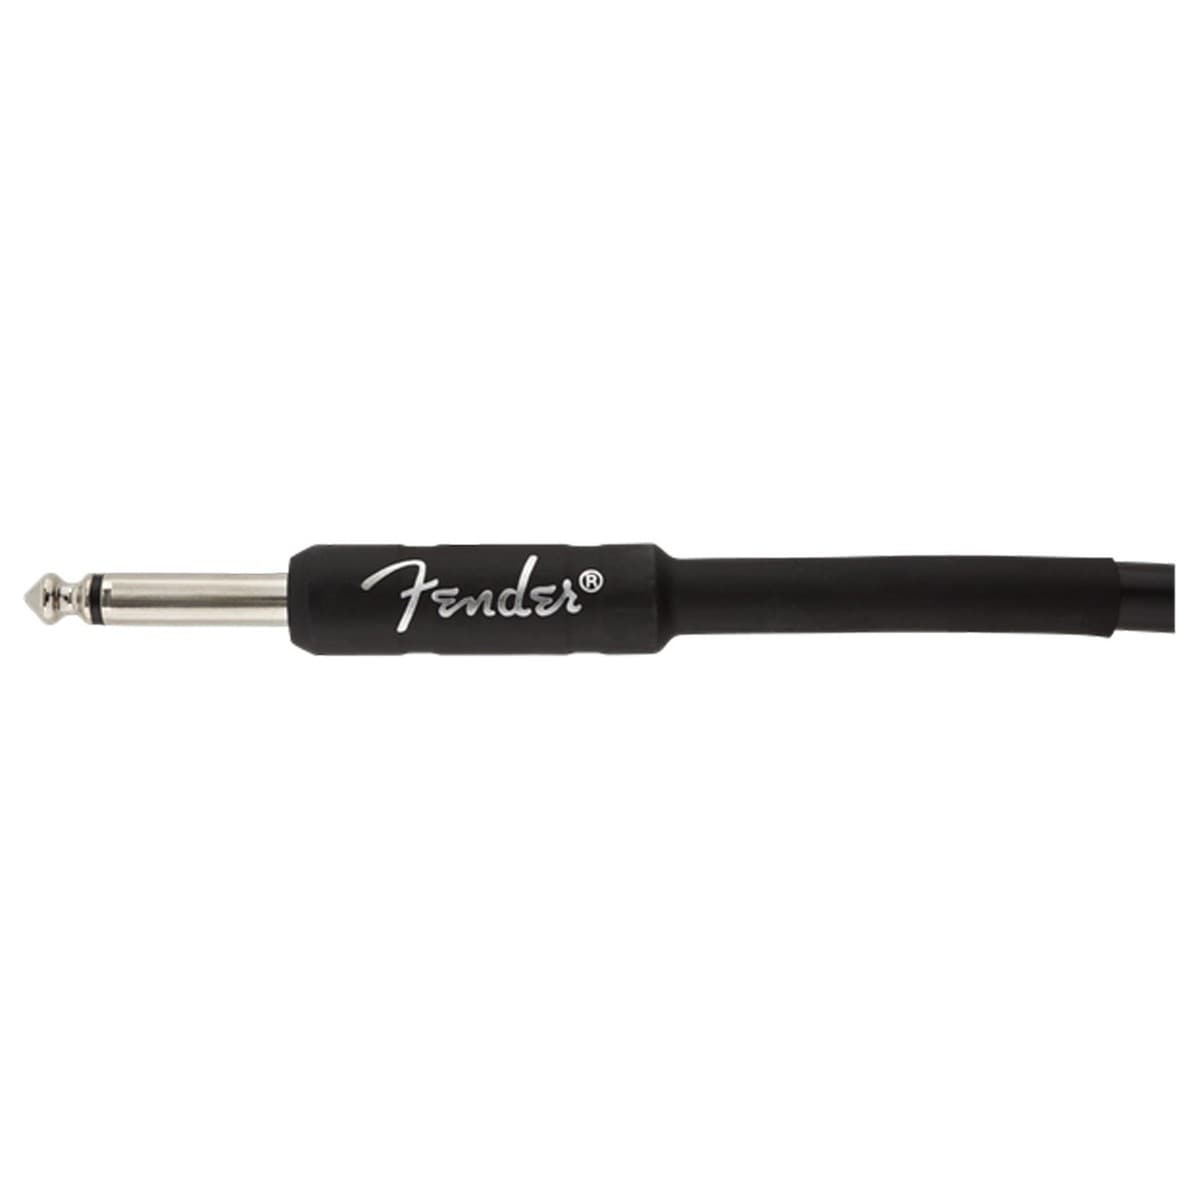 Fender Professional Series Instrument Cable - Right Angle - 5.5m 18.6ft - Black (0990820019)